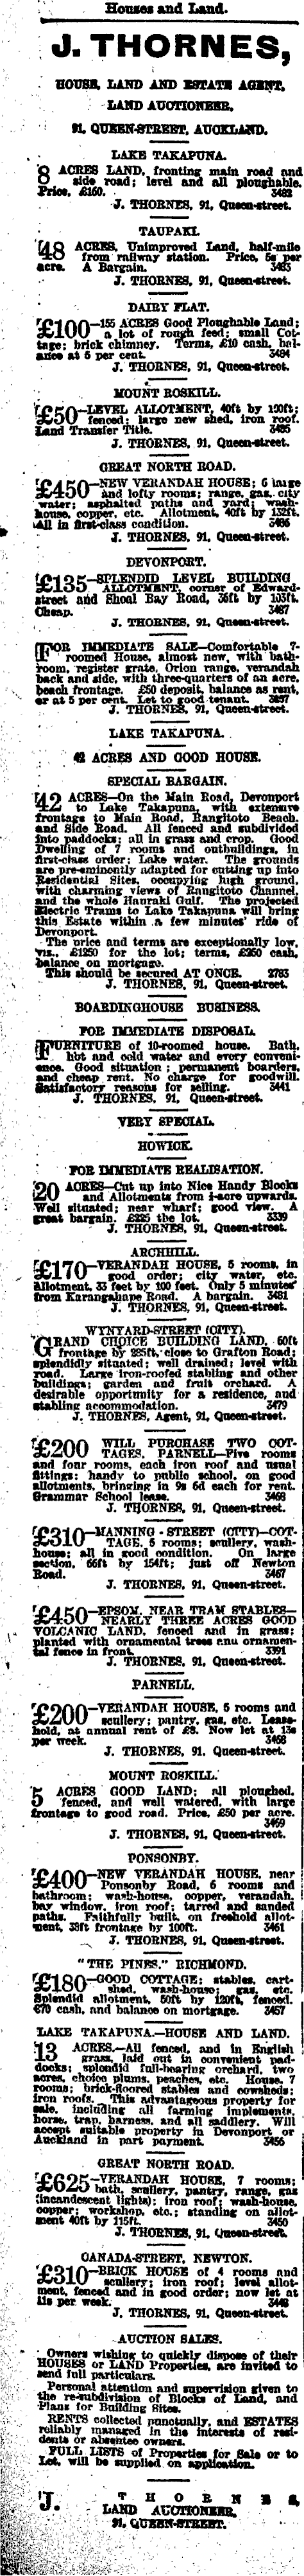 Papers Past Newspapers New Zealand Herald 6 October 1900 Page 2 Advertisements Column 1